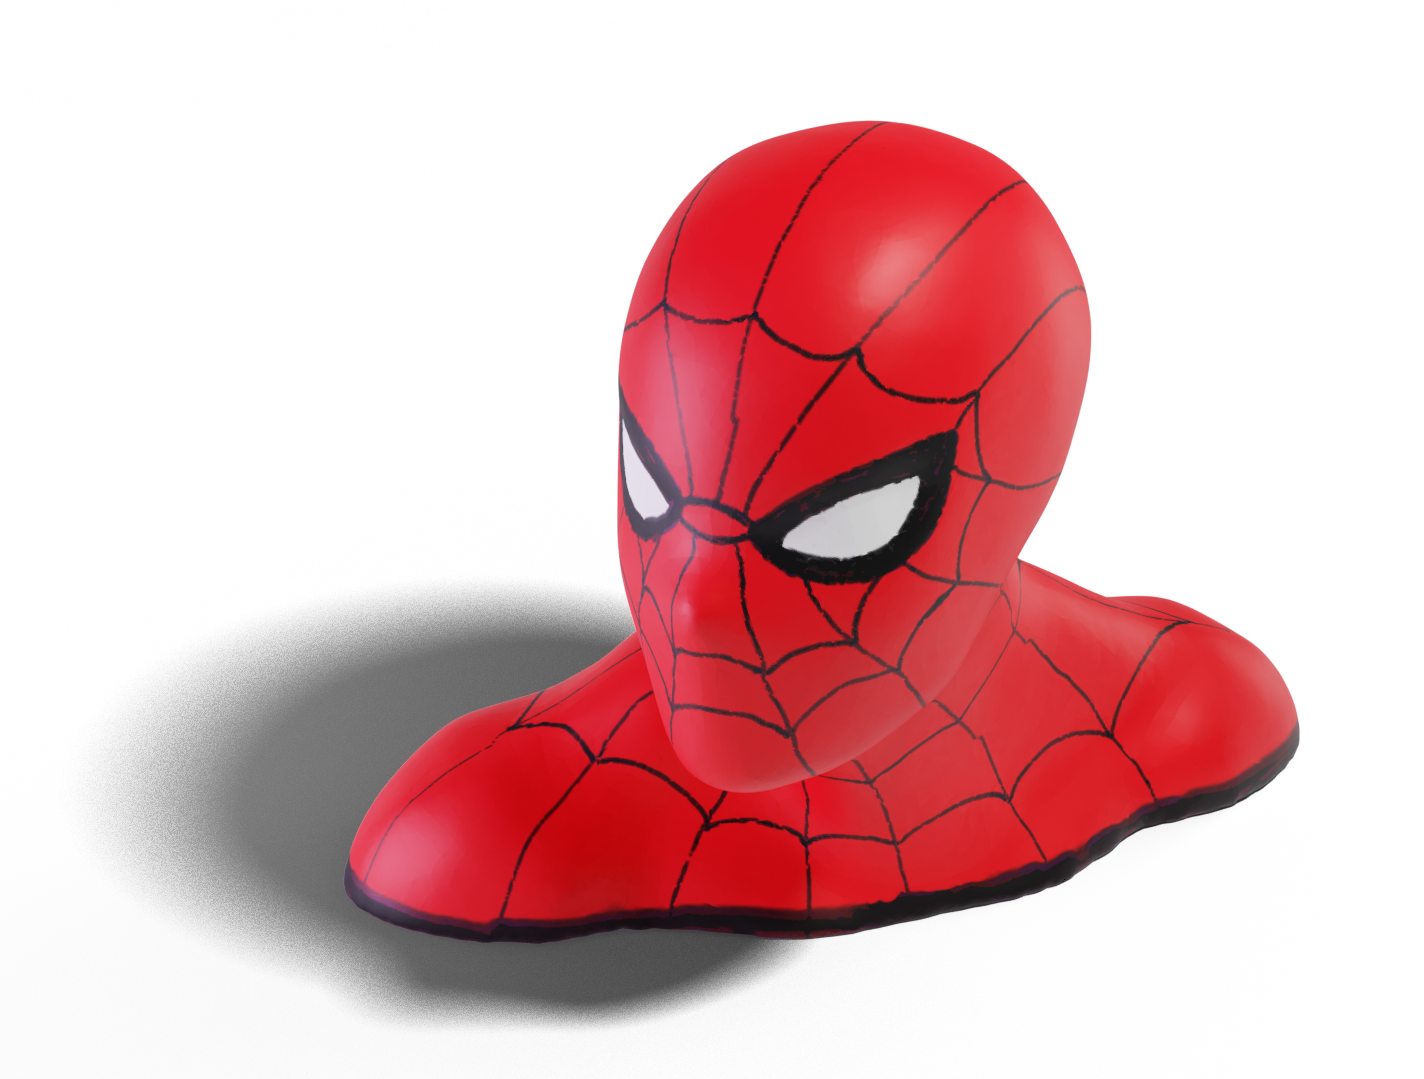 Textured spiderman bust, texture drawn using mimicry